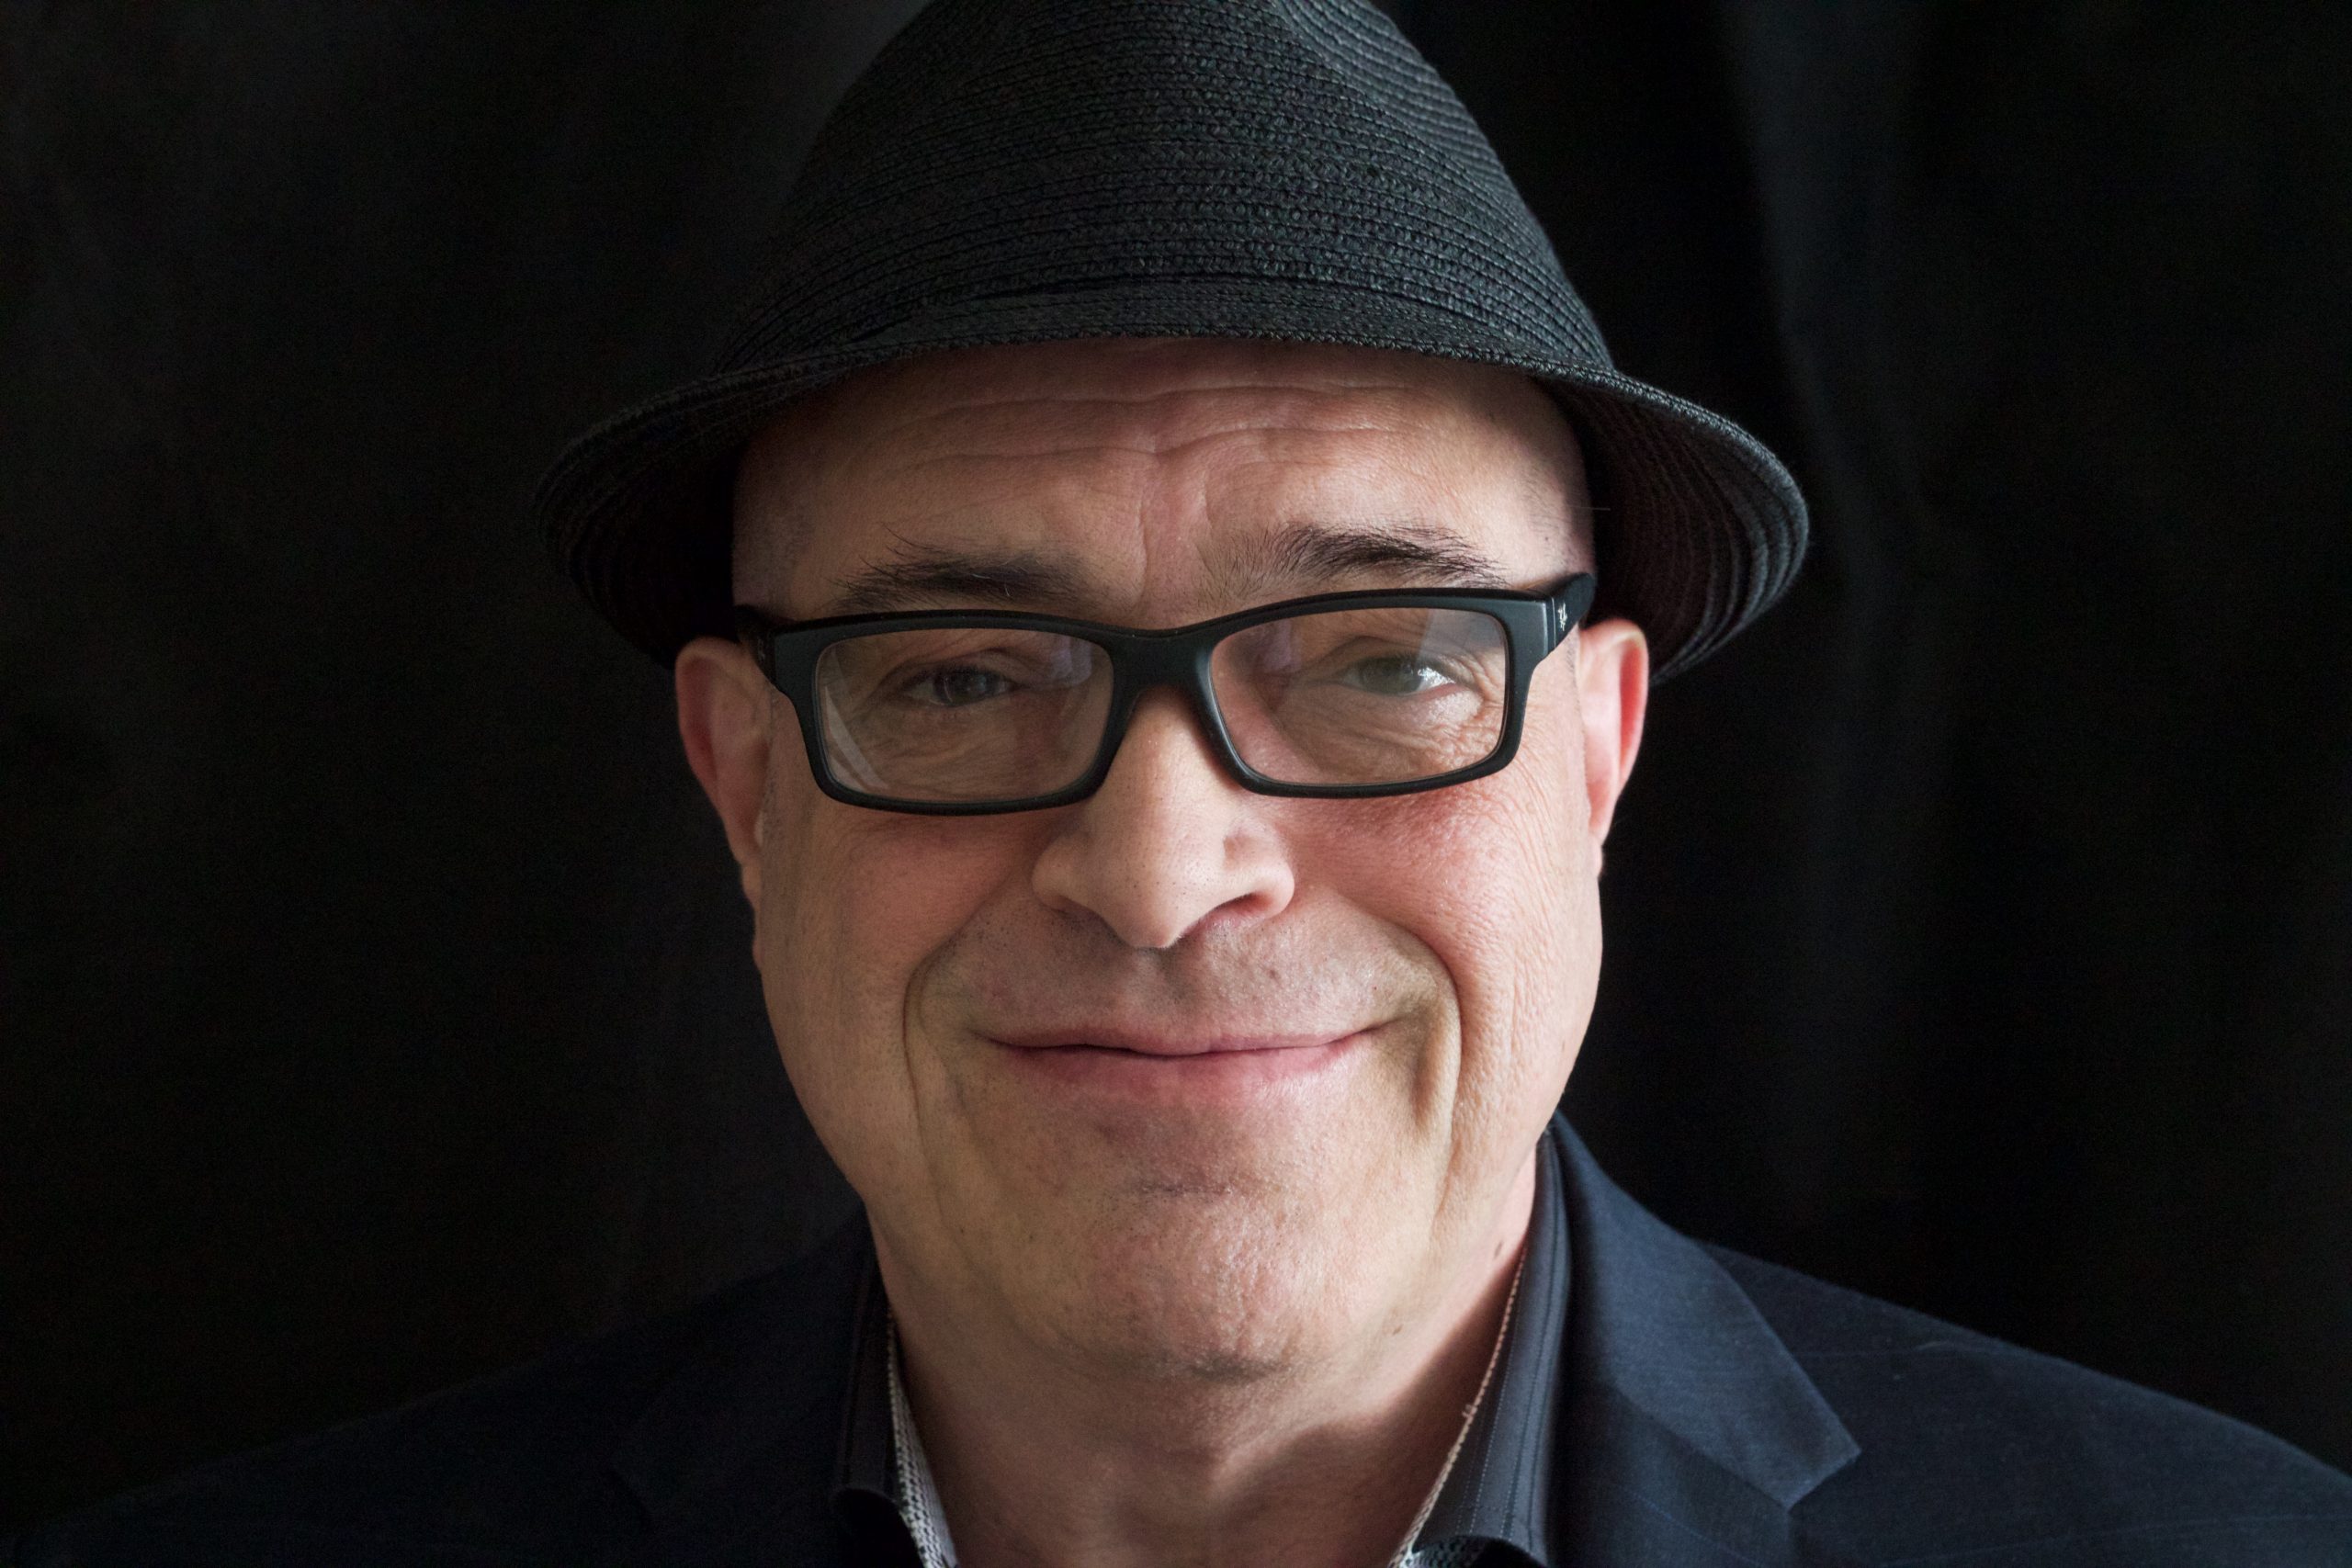 A headshot of Jack Dennis smiling as he wears glasses and a hat.